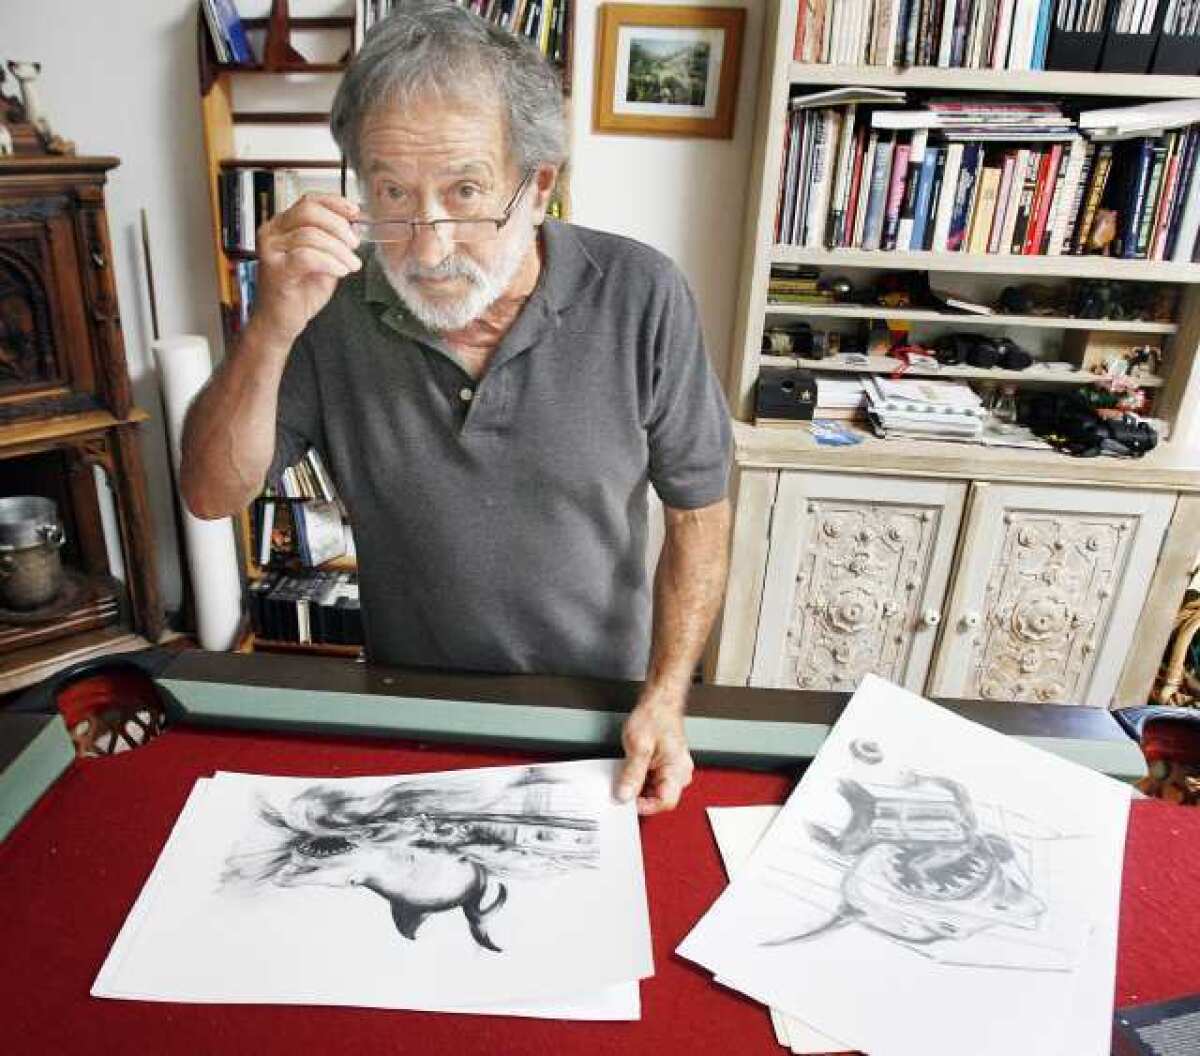 Joe Alves, in his Woodland Hills home showing his sketches of the big shark that eventually turned into Jaws. Alves designed the shark in Jaws and will be sharing stories of the work that went into the making of the movie at the Alex Theatre on July 28.